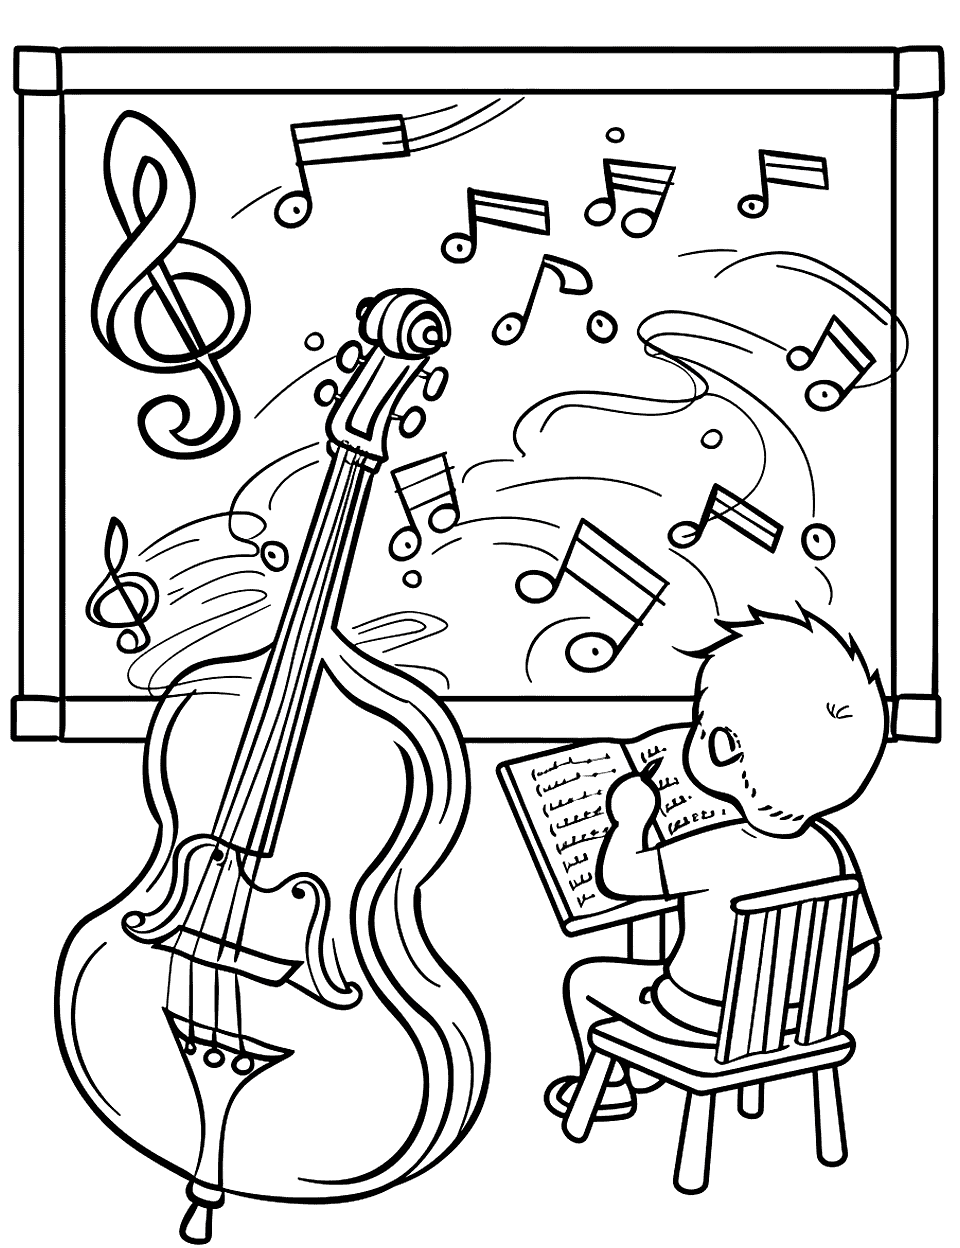 Music Theory Class Coloring Page - Children learning about music notes and symbols on a classroom blackboard.